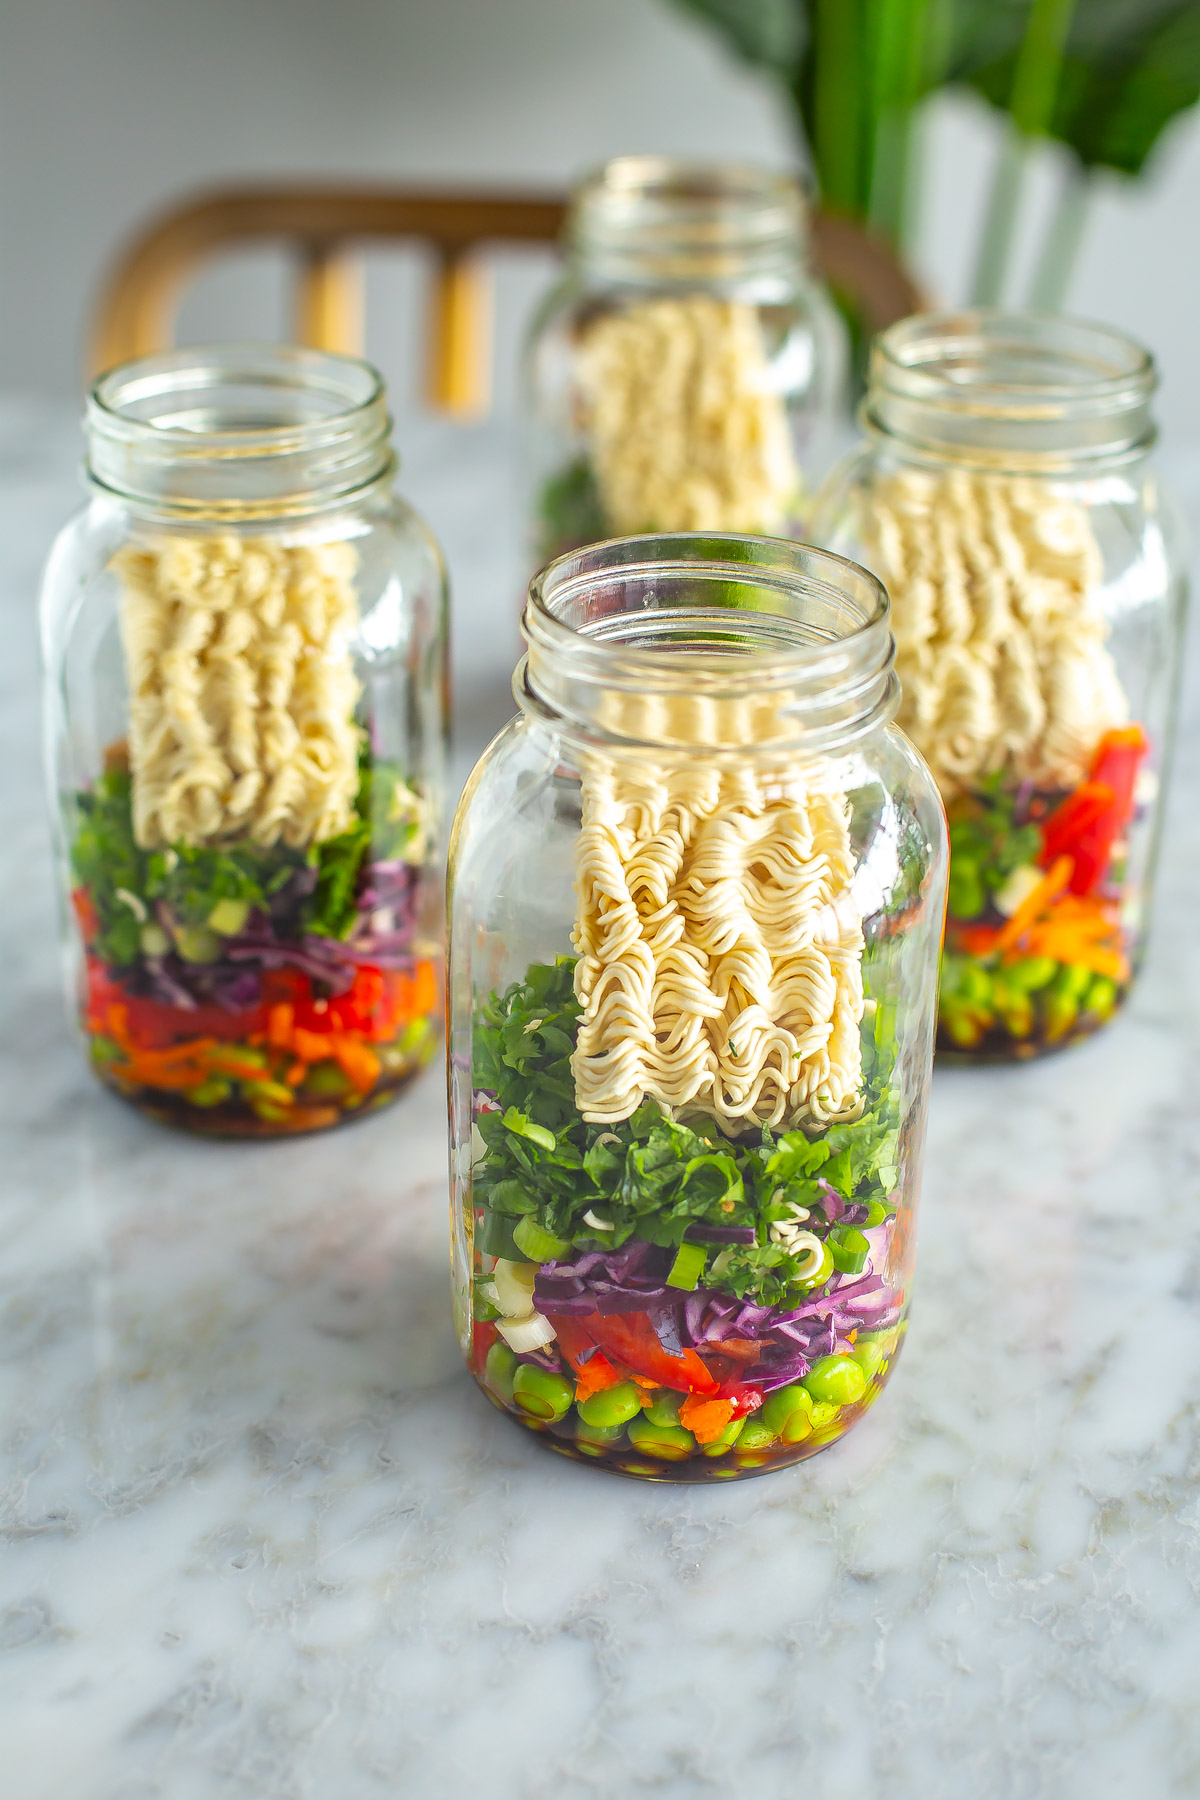 Four mason jars, each filled with instant noodles, vegetables and herbs.